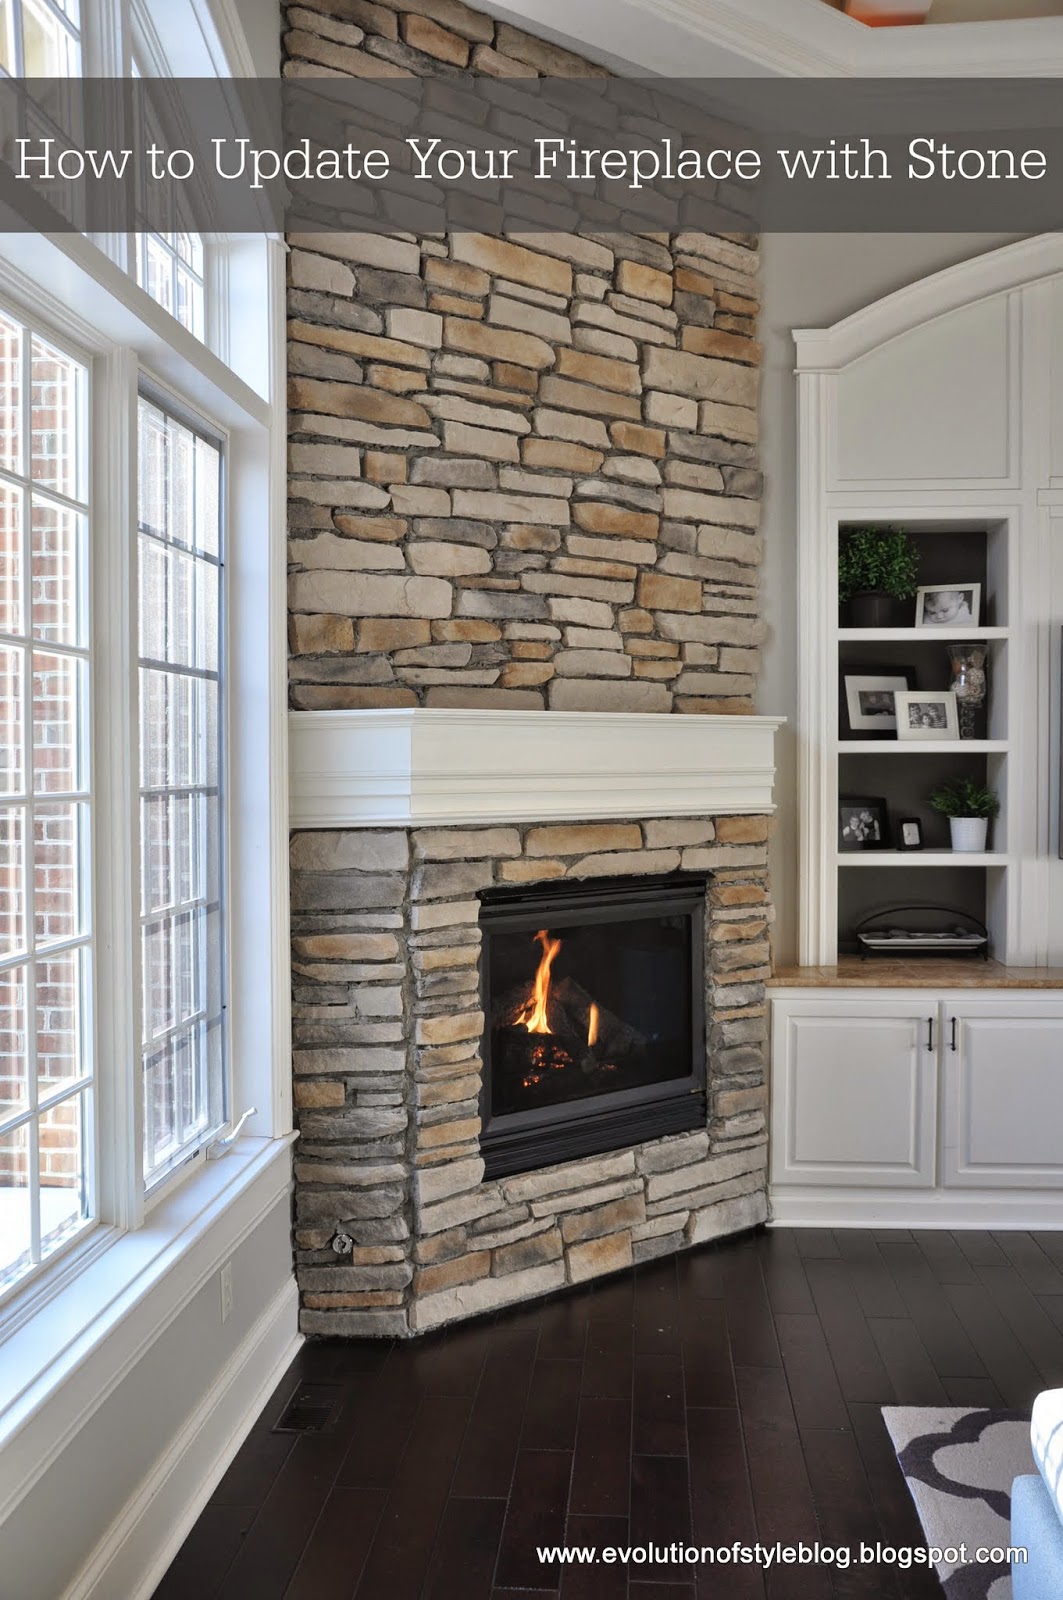 Stone Veneer Fireplace Surround Fresh How to Update Your Fireplace with Stone Evolution Of Style